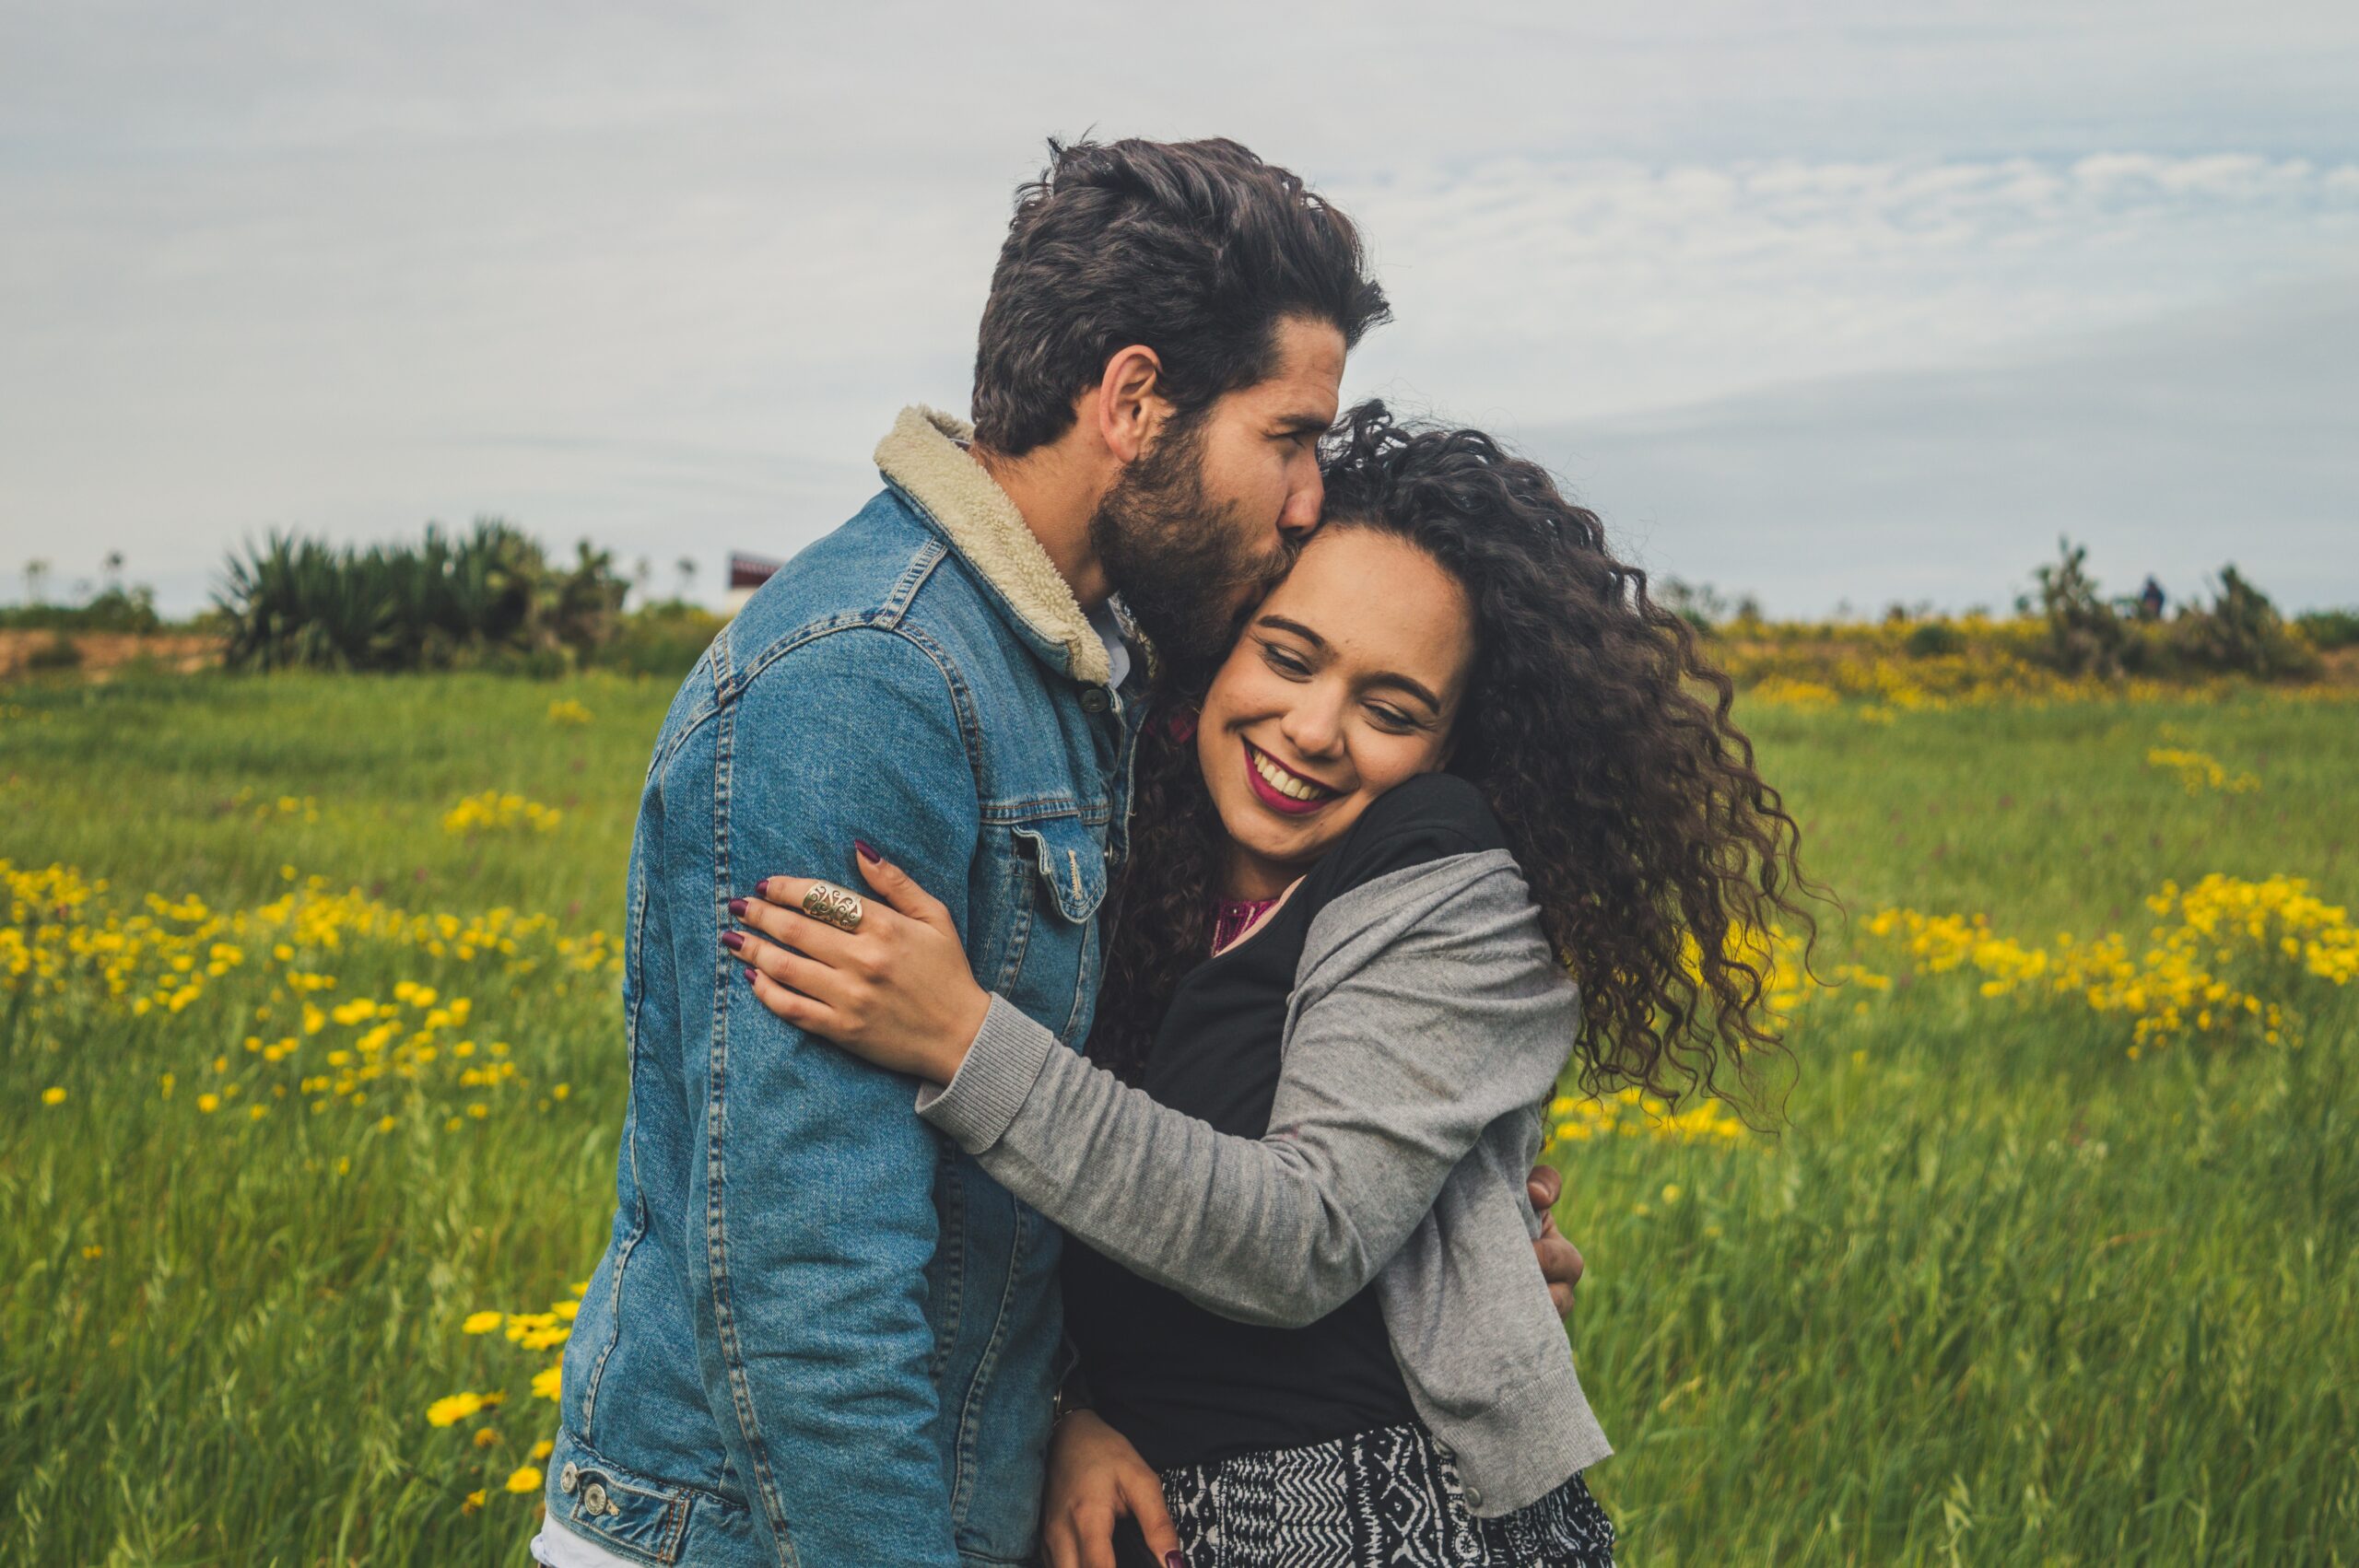 The Ultimate Guide to Adult Matchmaking: Finding Love in the Modern Age